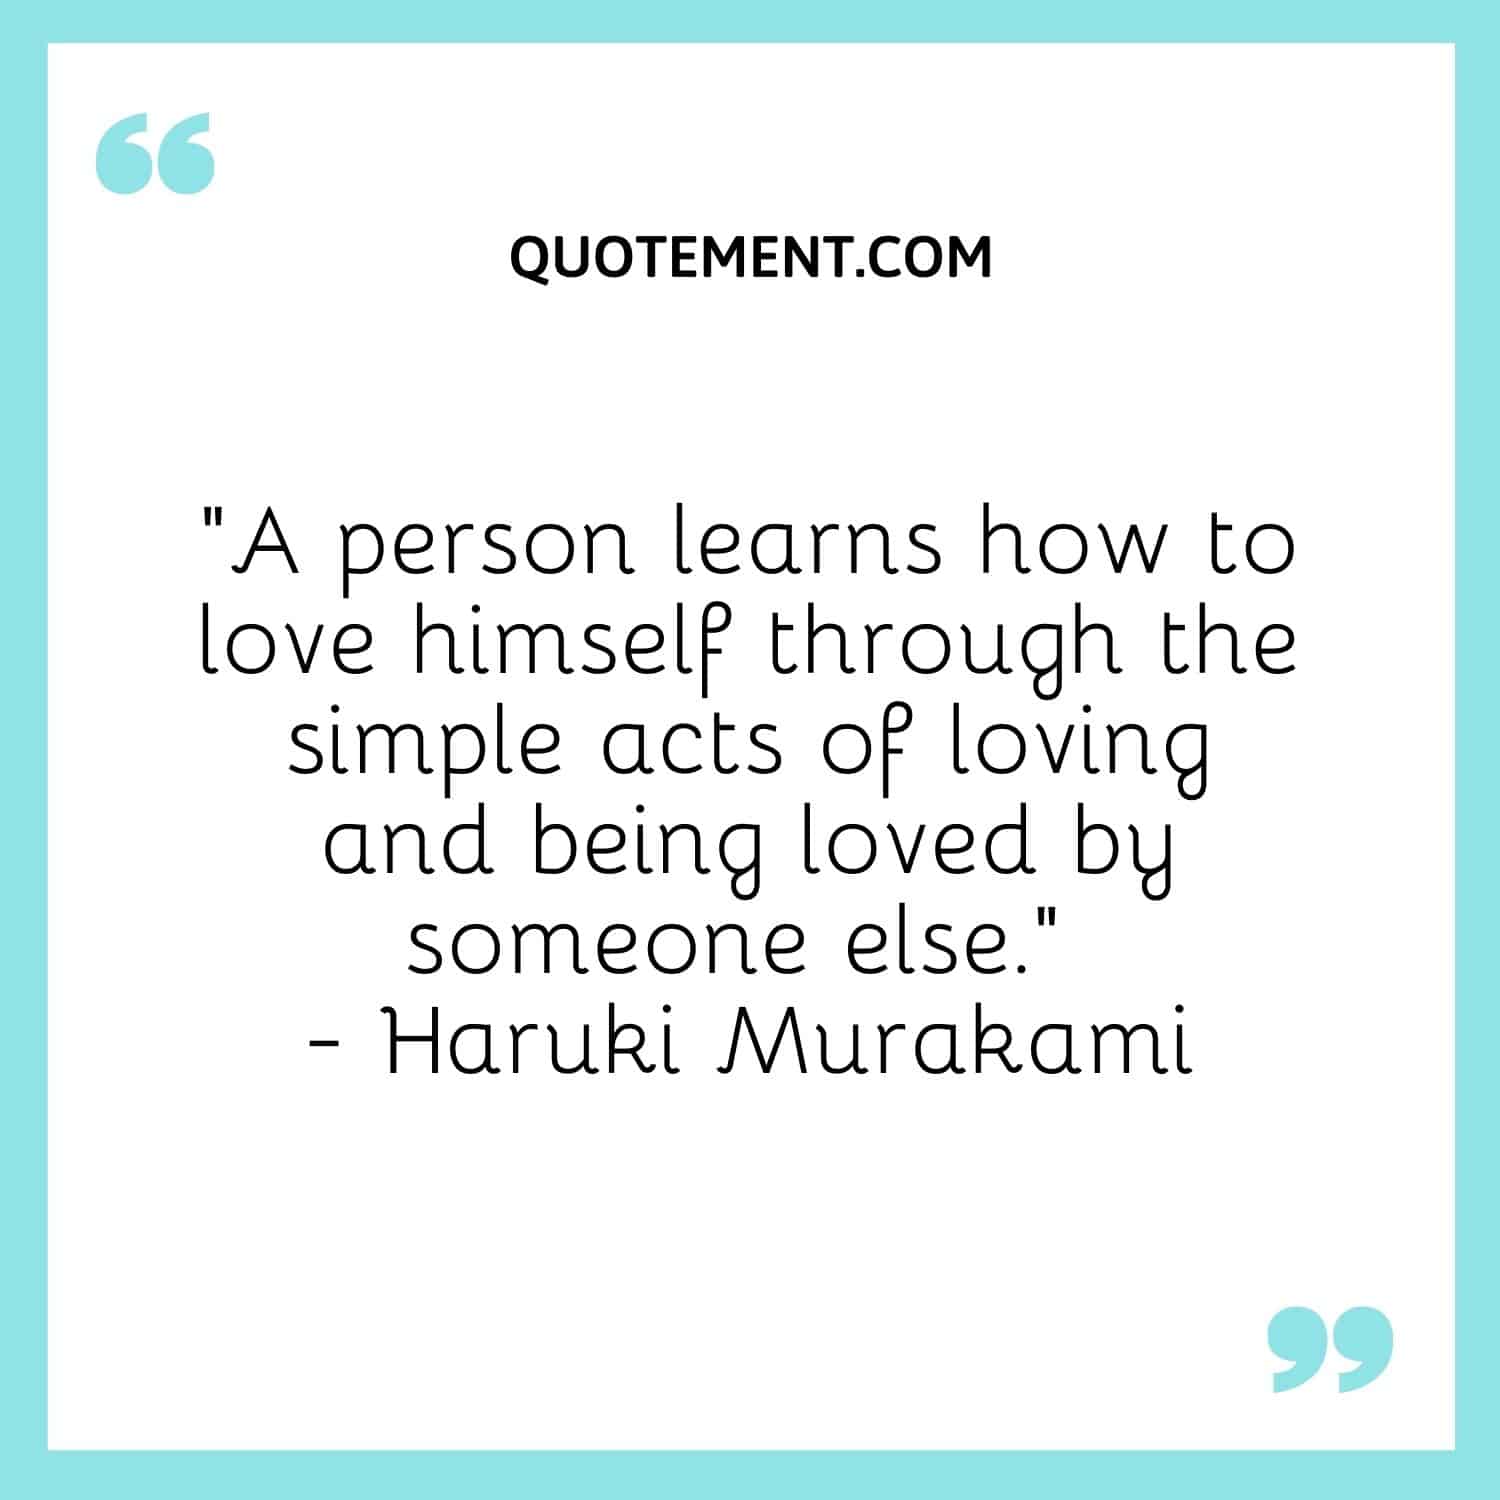 A person learns how to love himself through the simple acts of loving and being loved by someone else